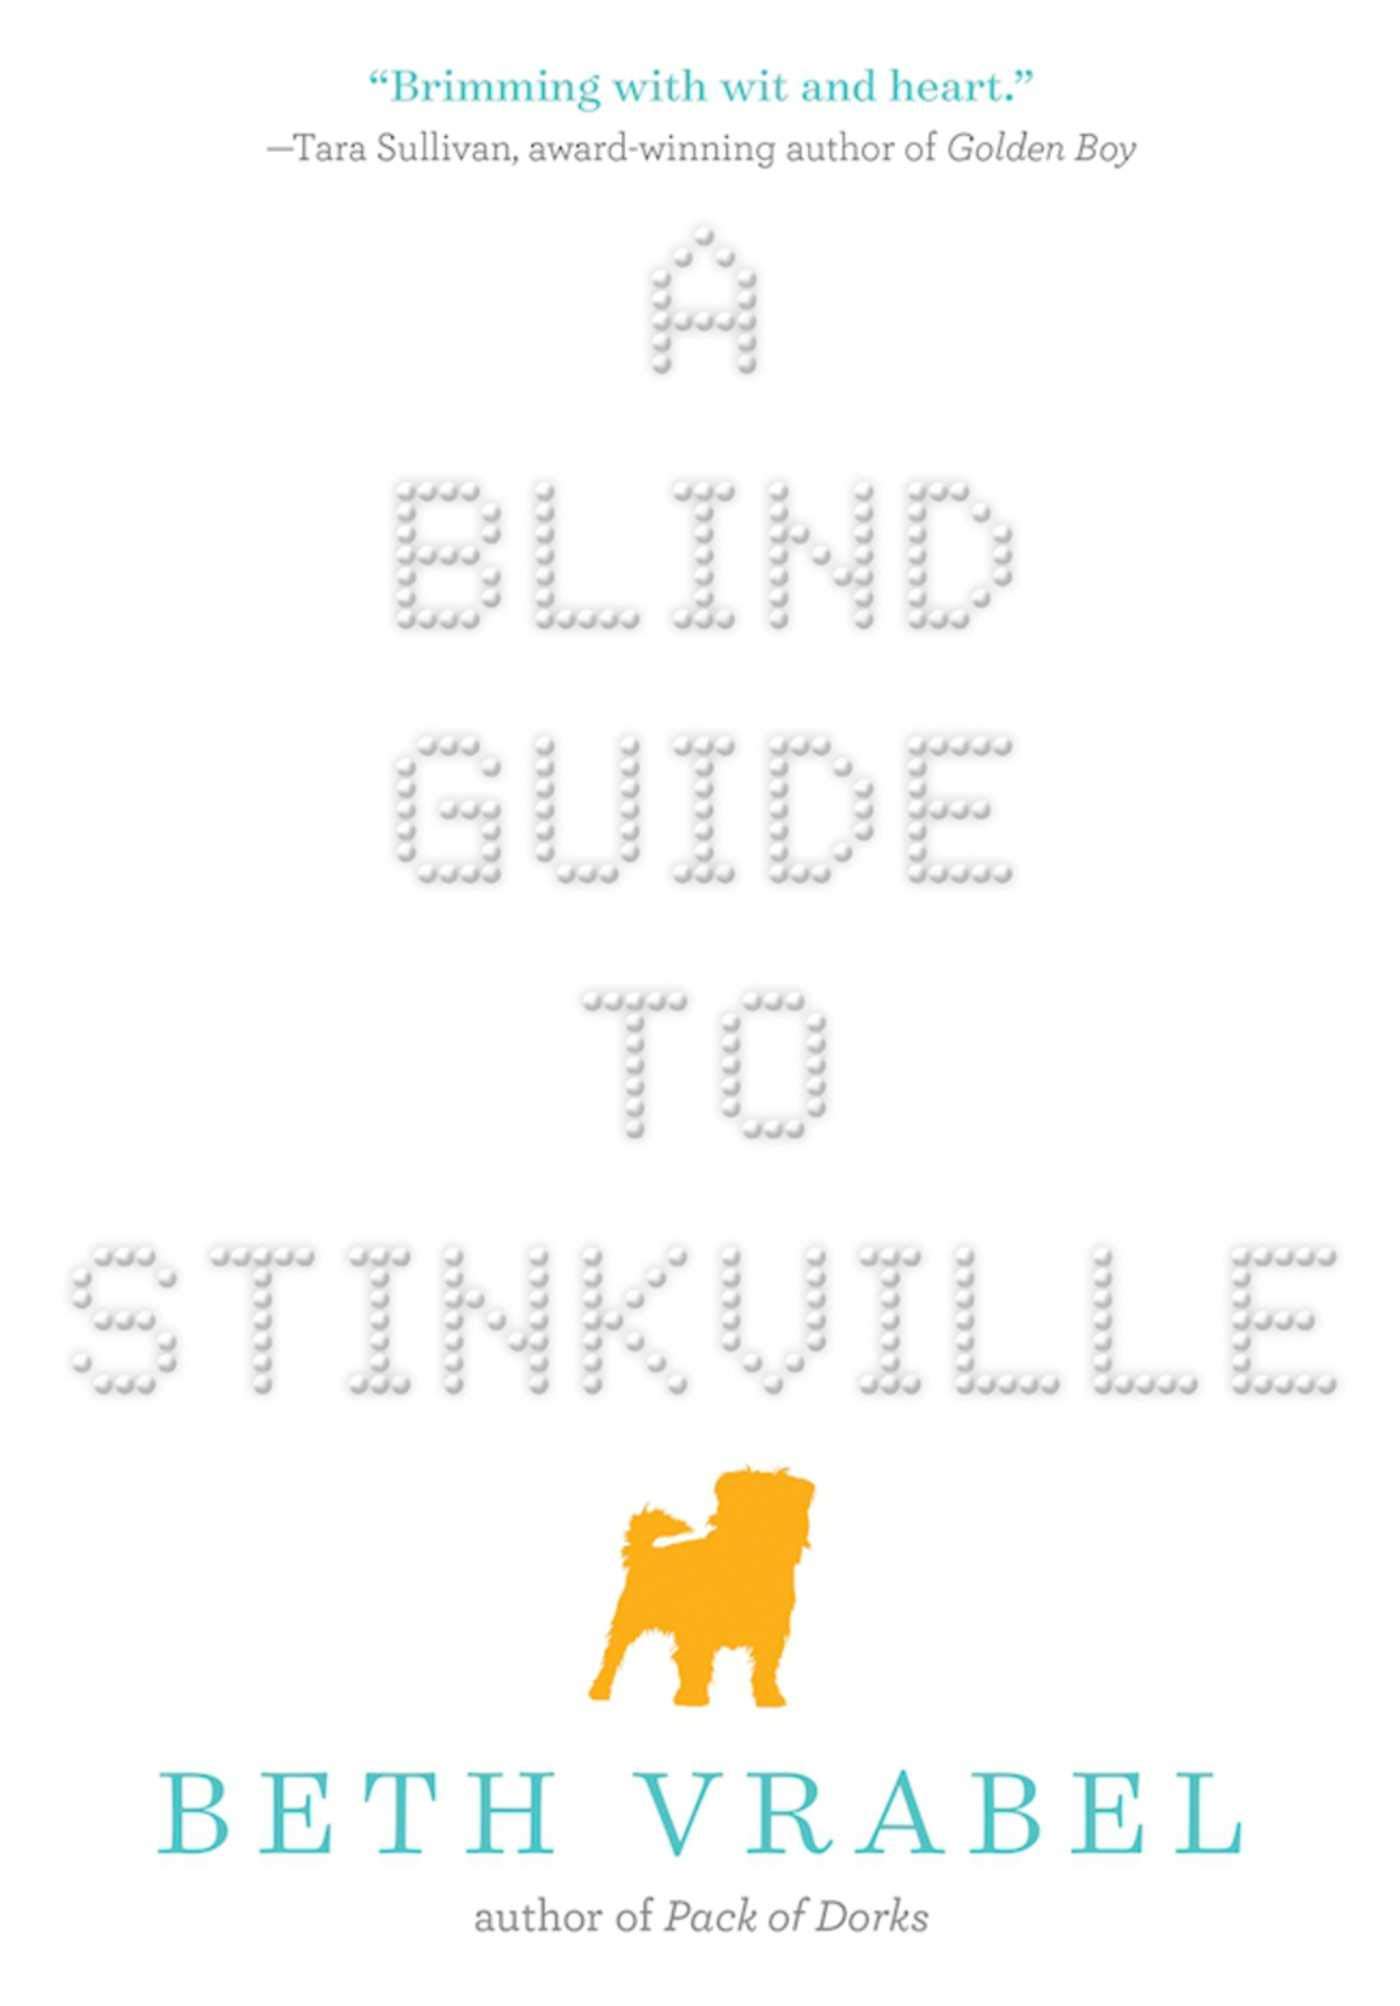 Image of "A Blind Guide To Stinkville"